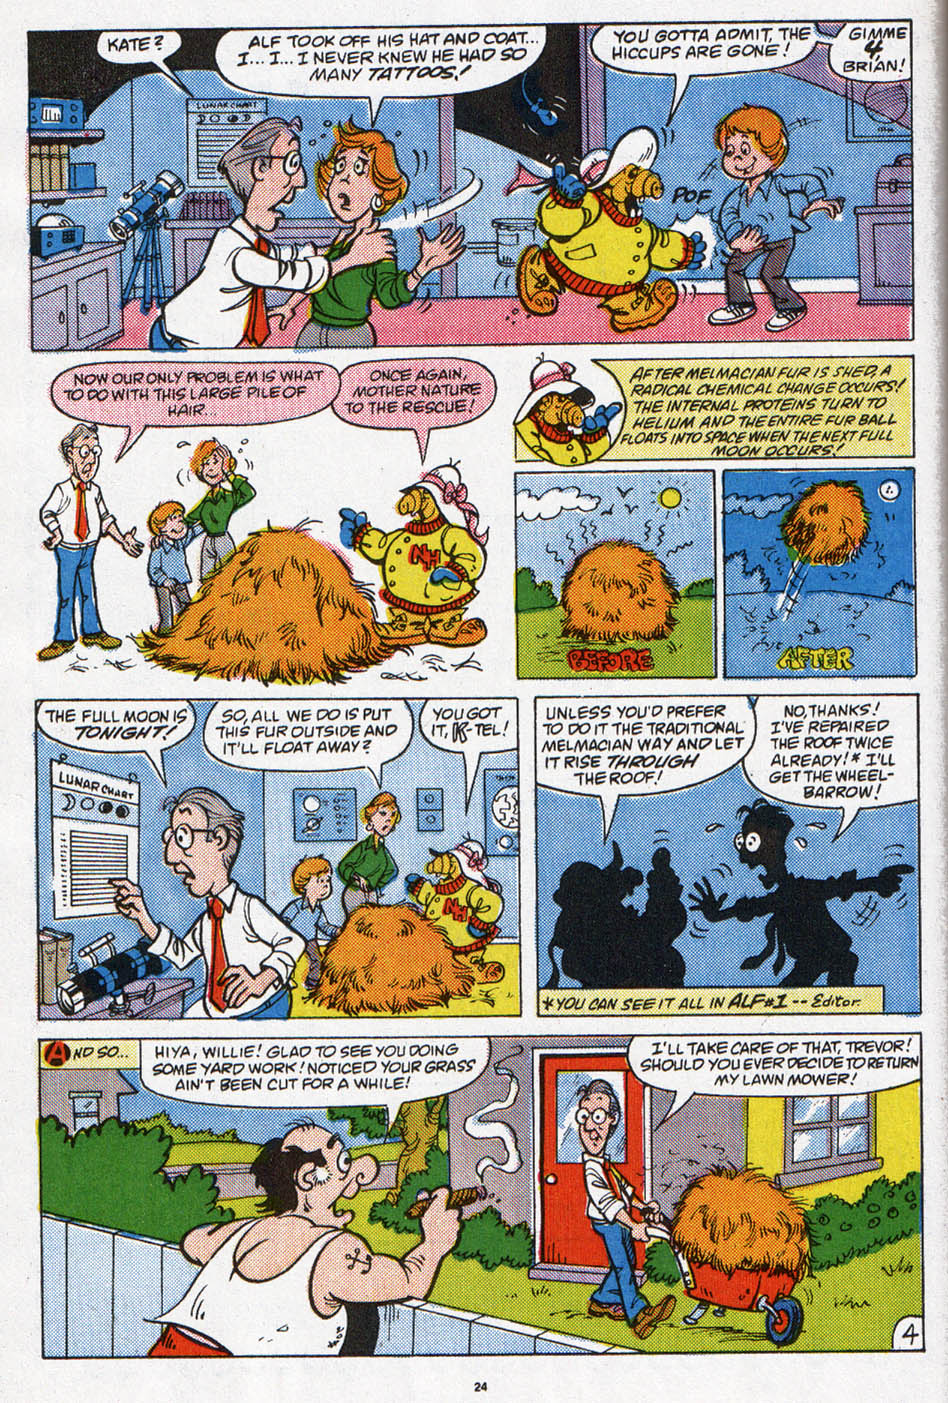 Read online ALF comic -  Issue #6 - 20